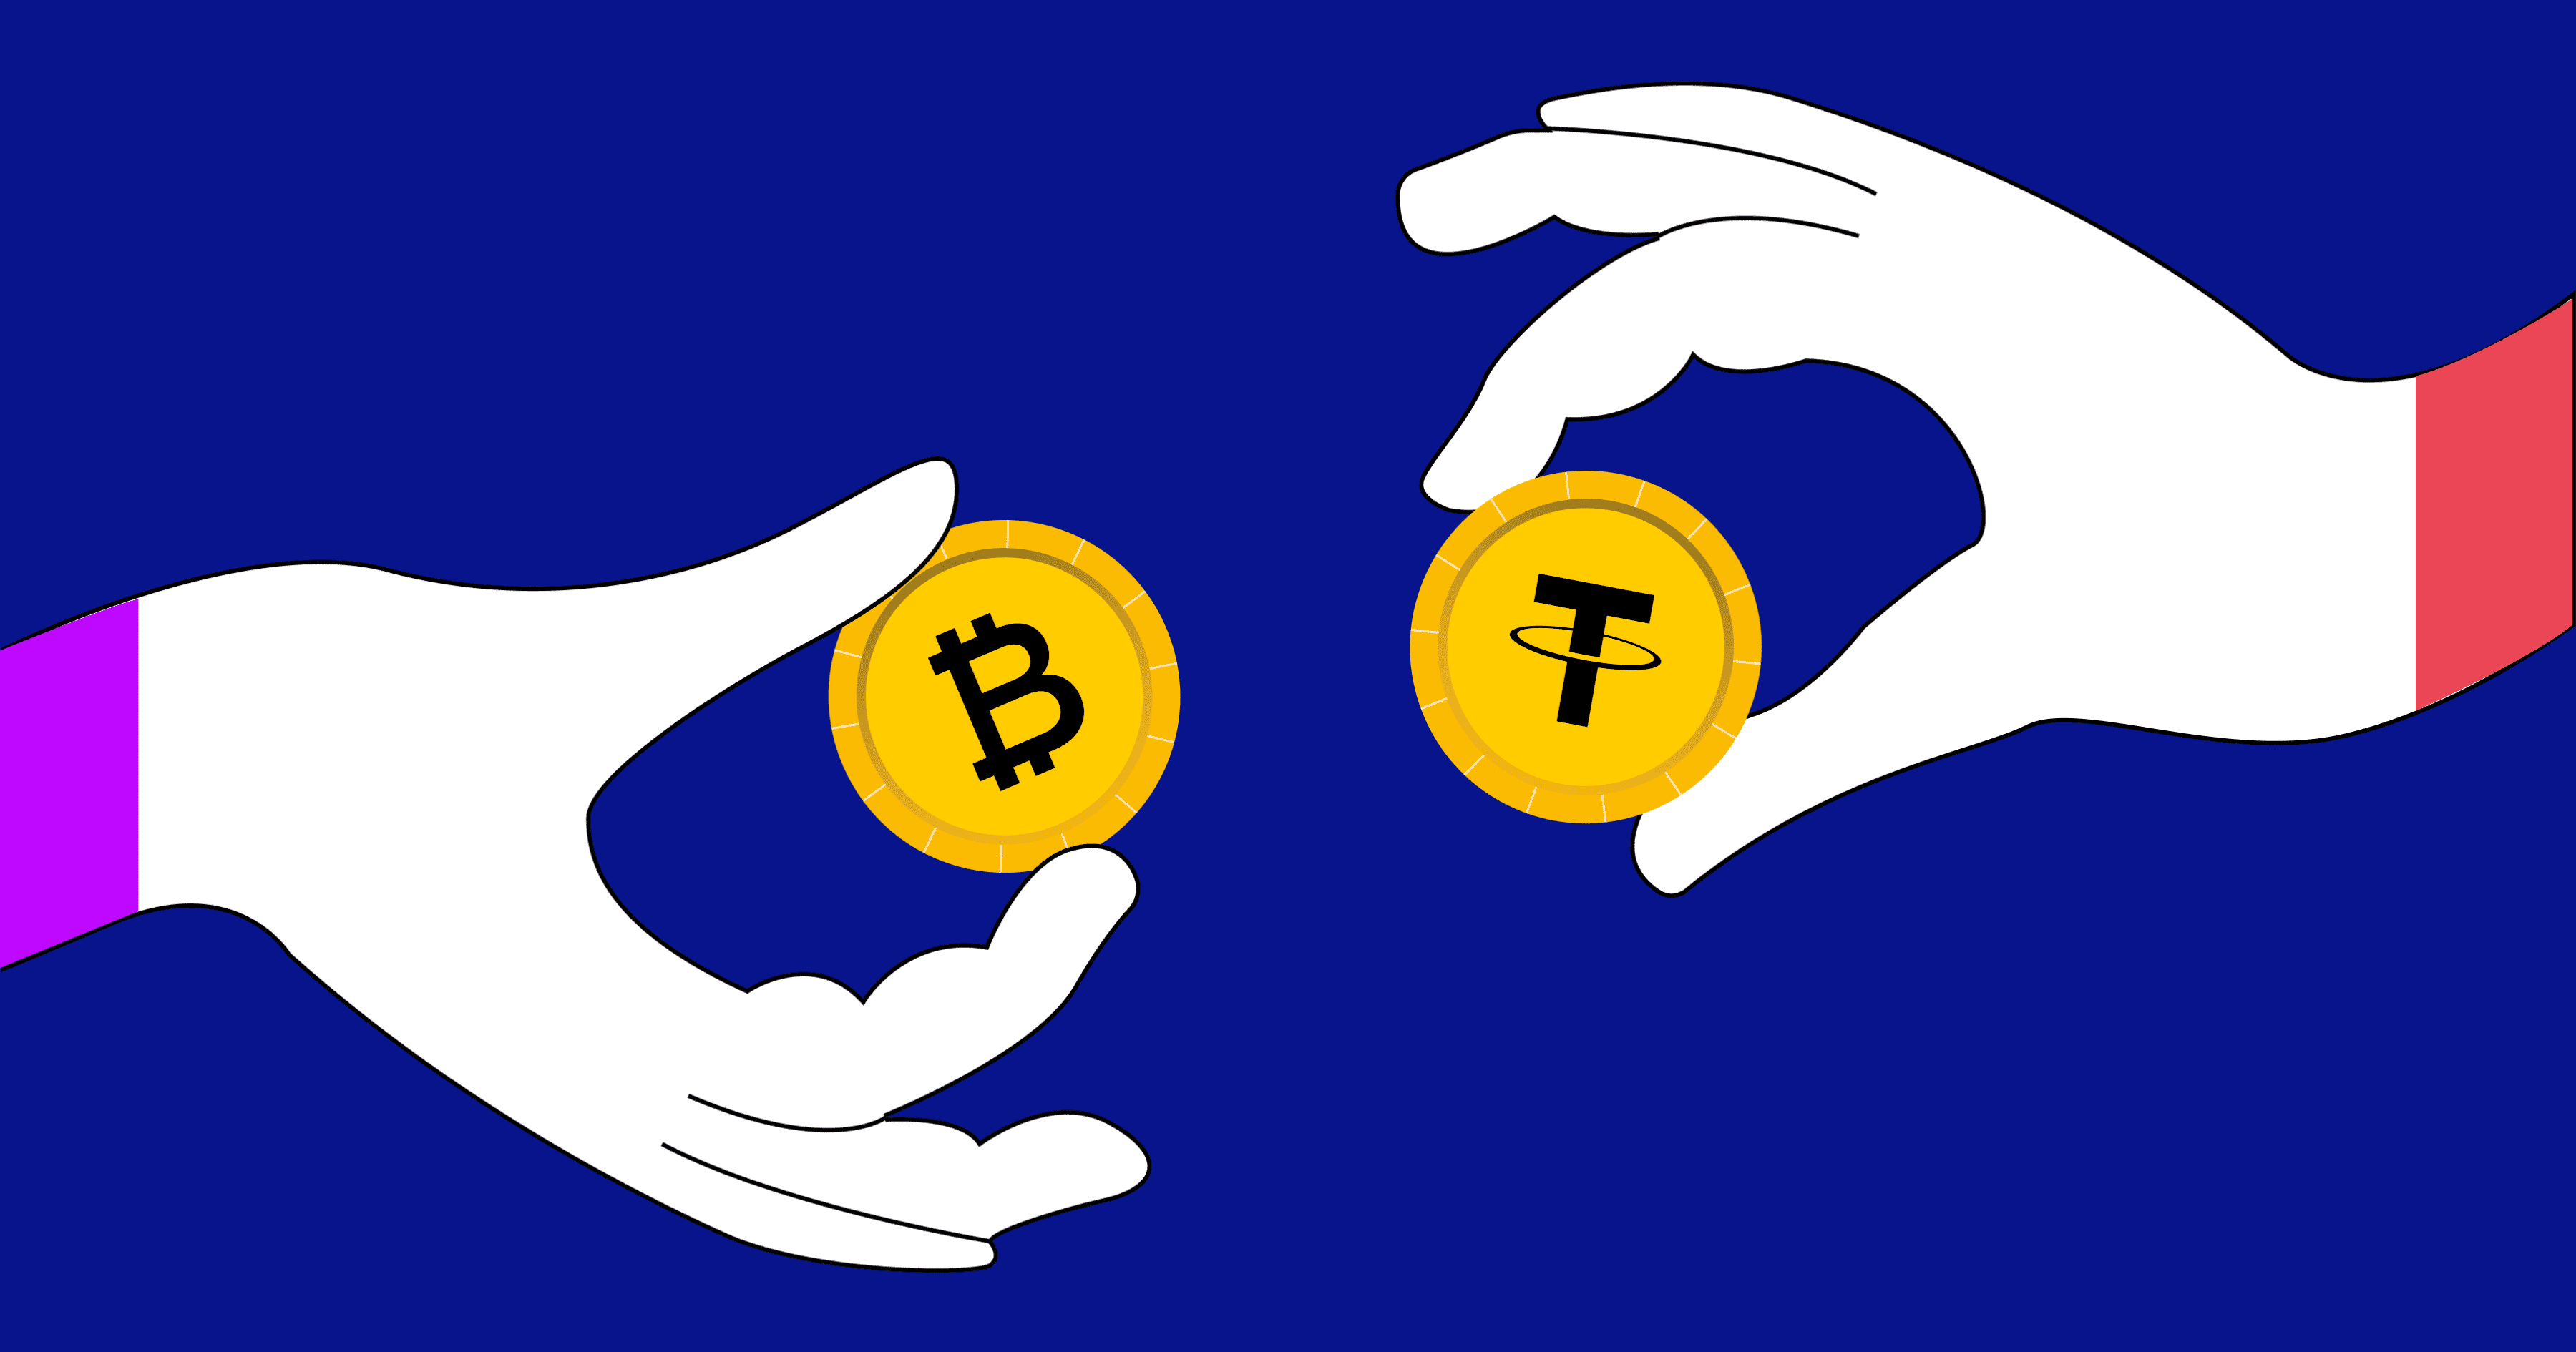 coins vs tokens